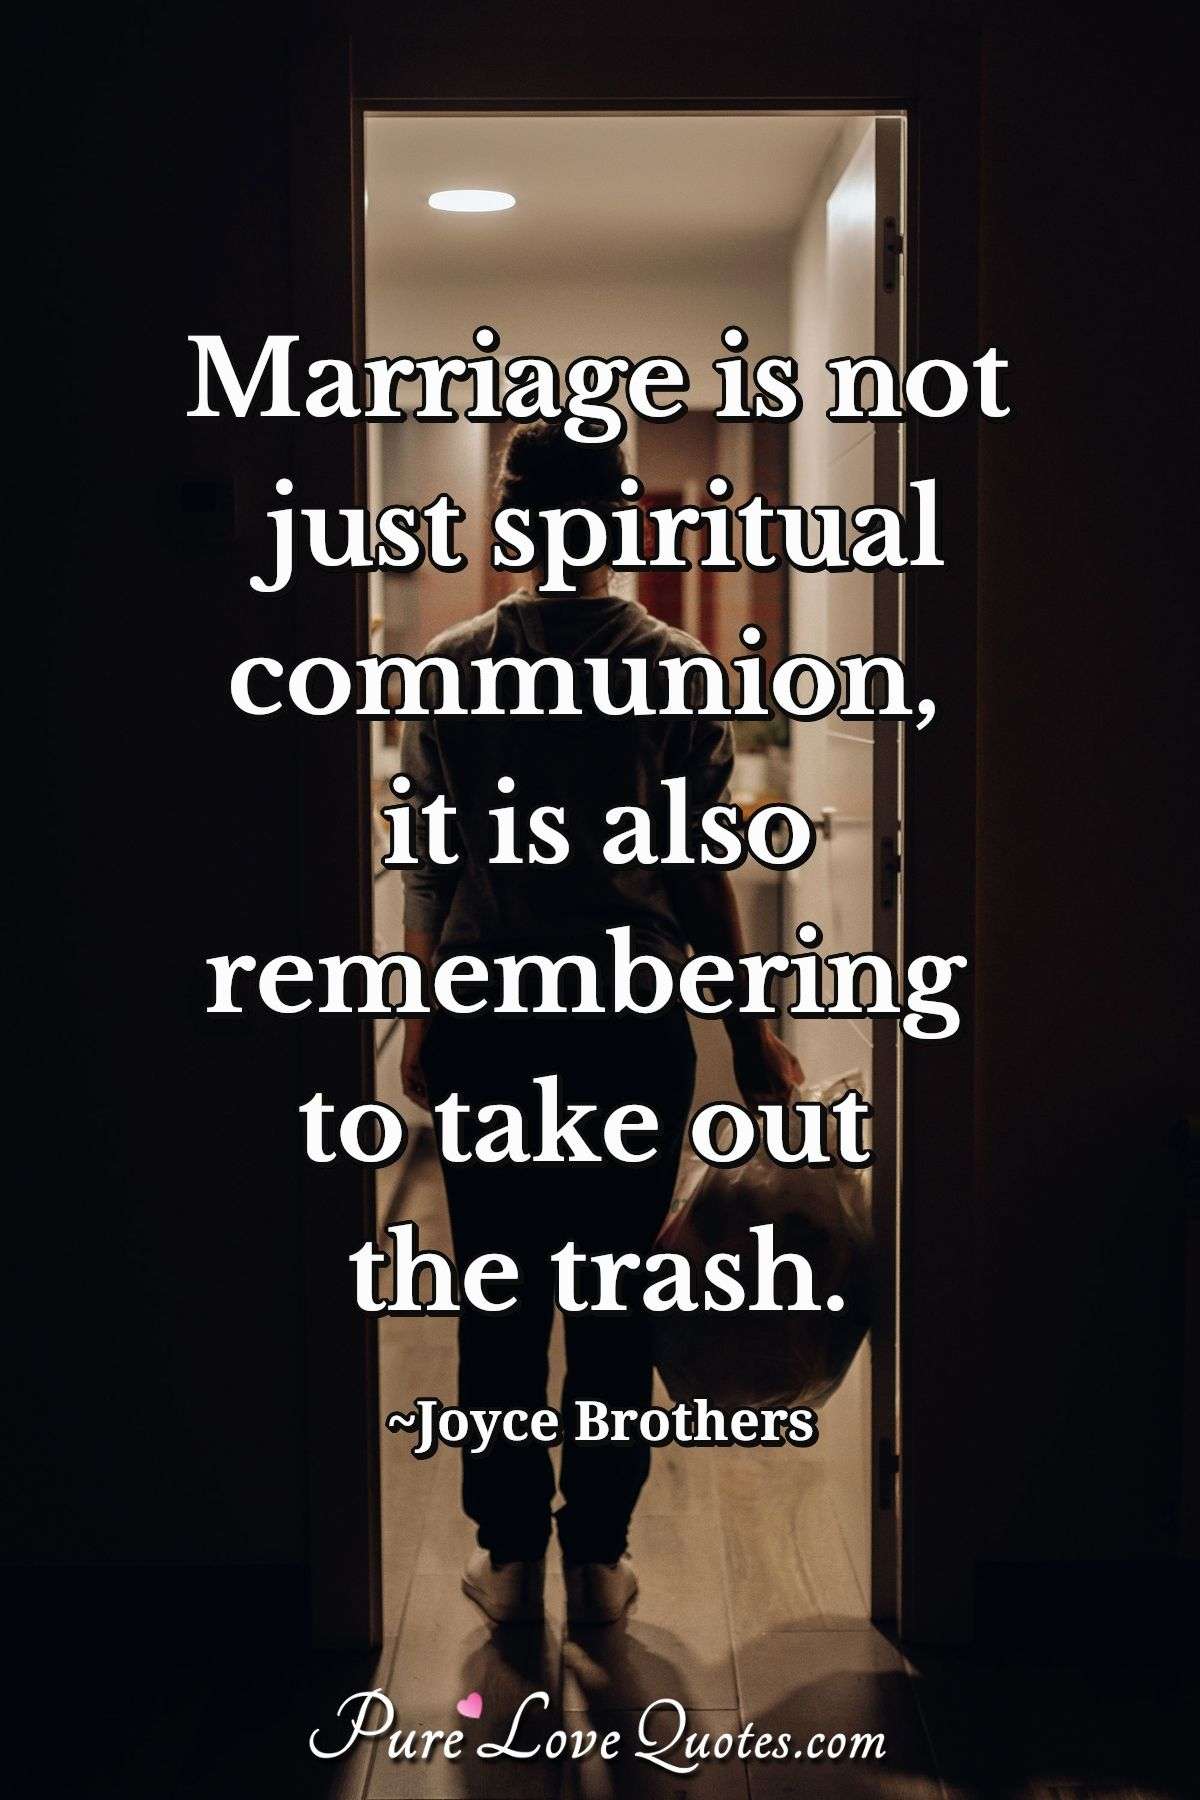 Marriage is not just spiritual communion, it is also remembering to take out the trash. - Joyce Brothers